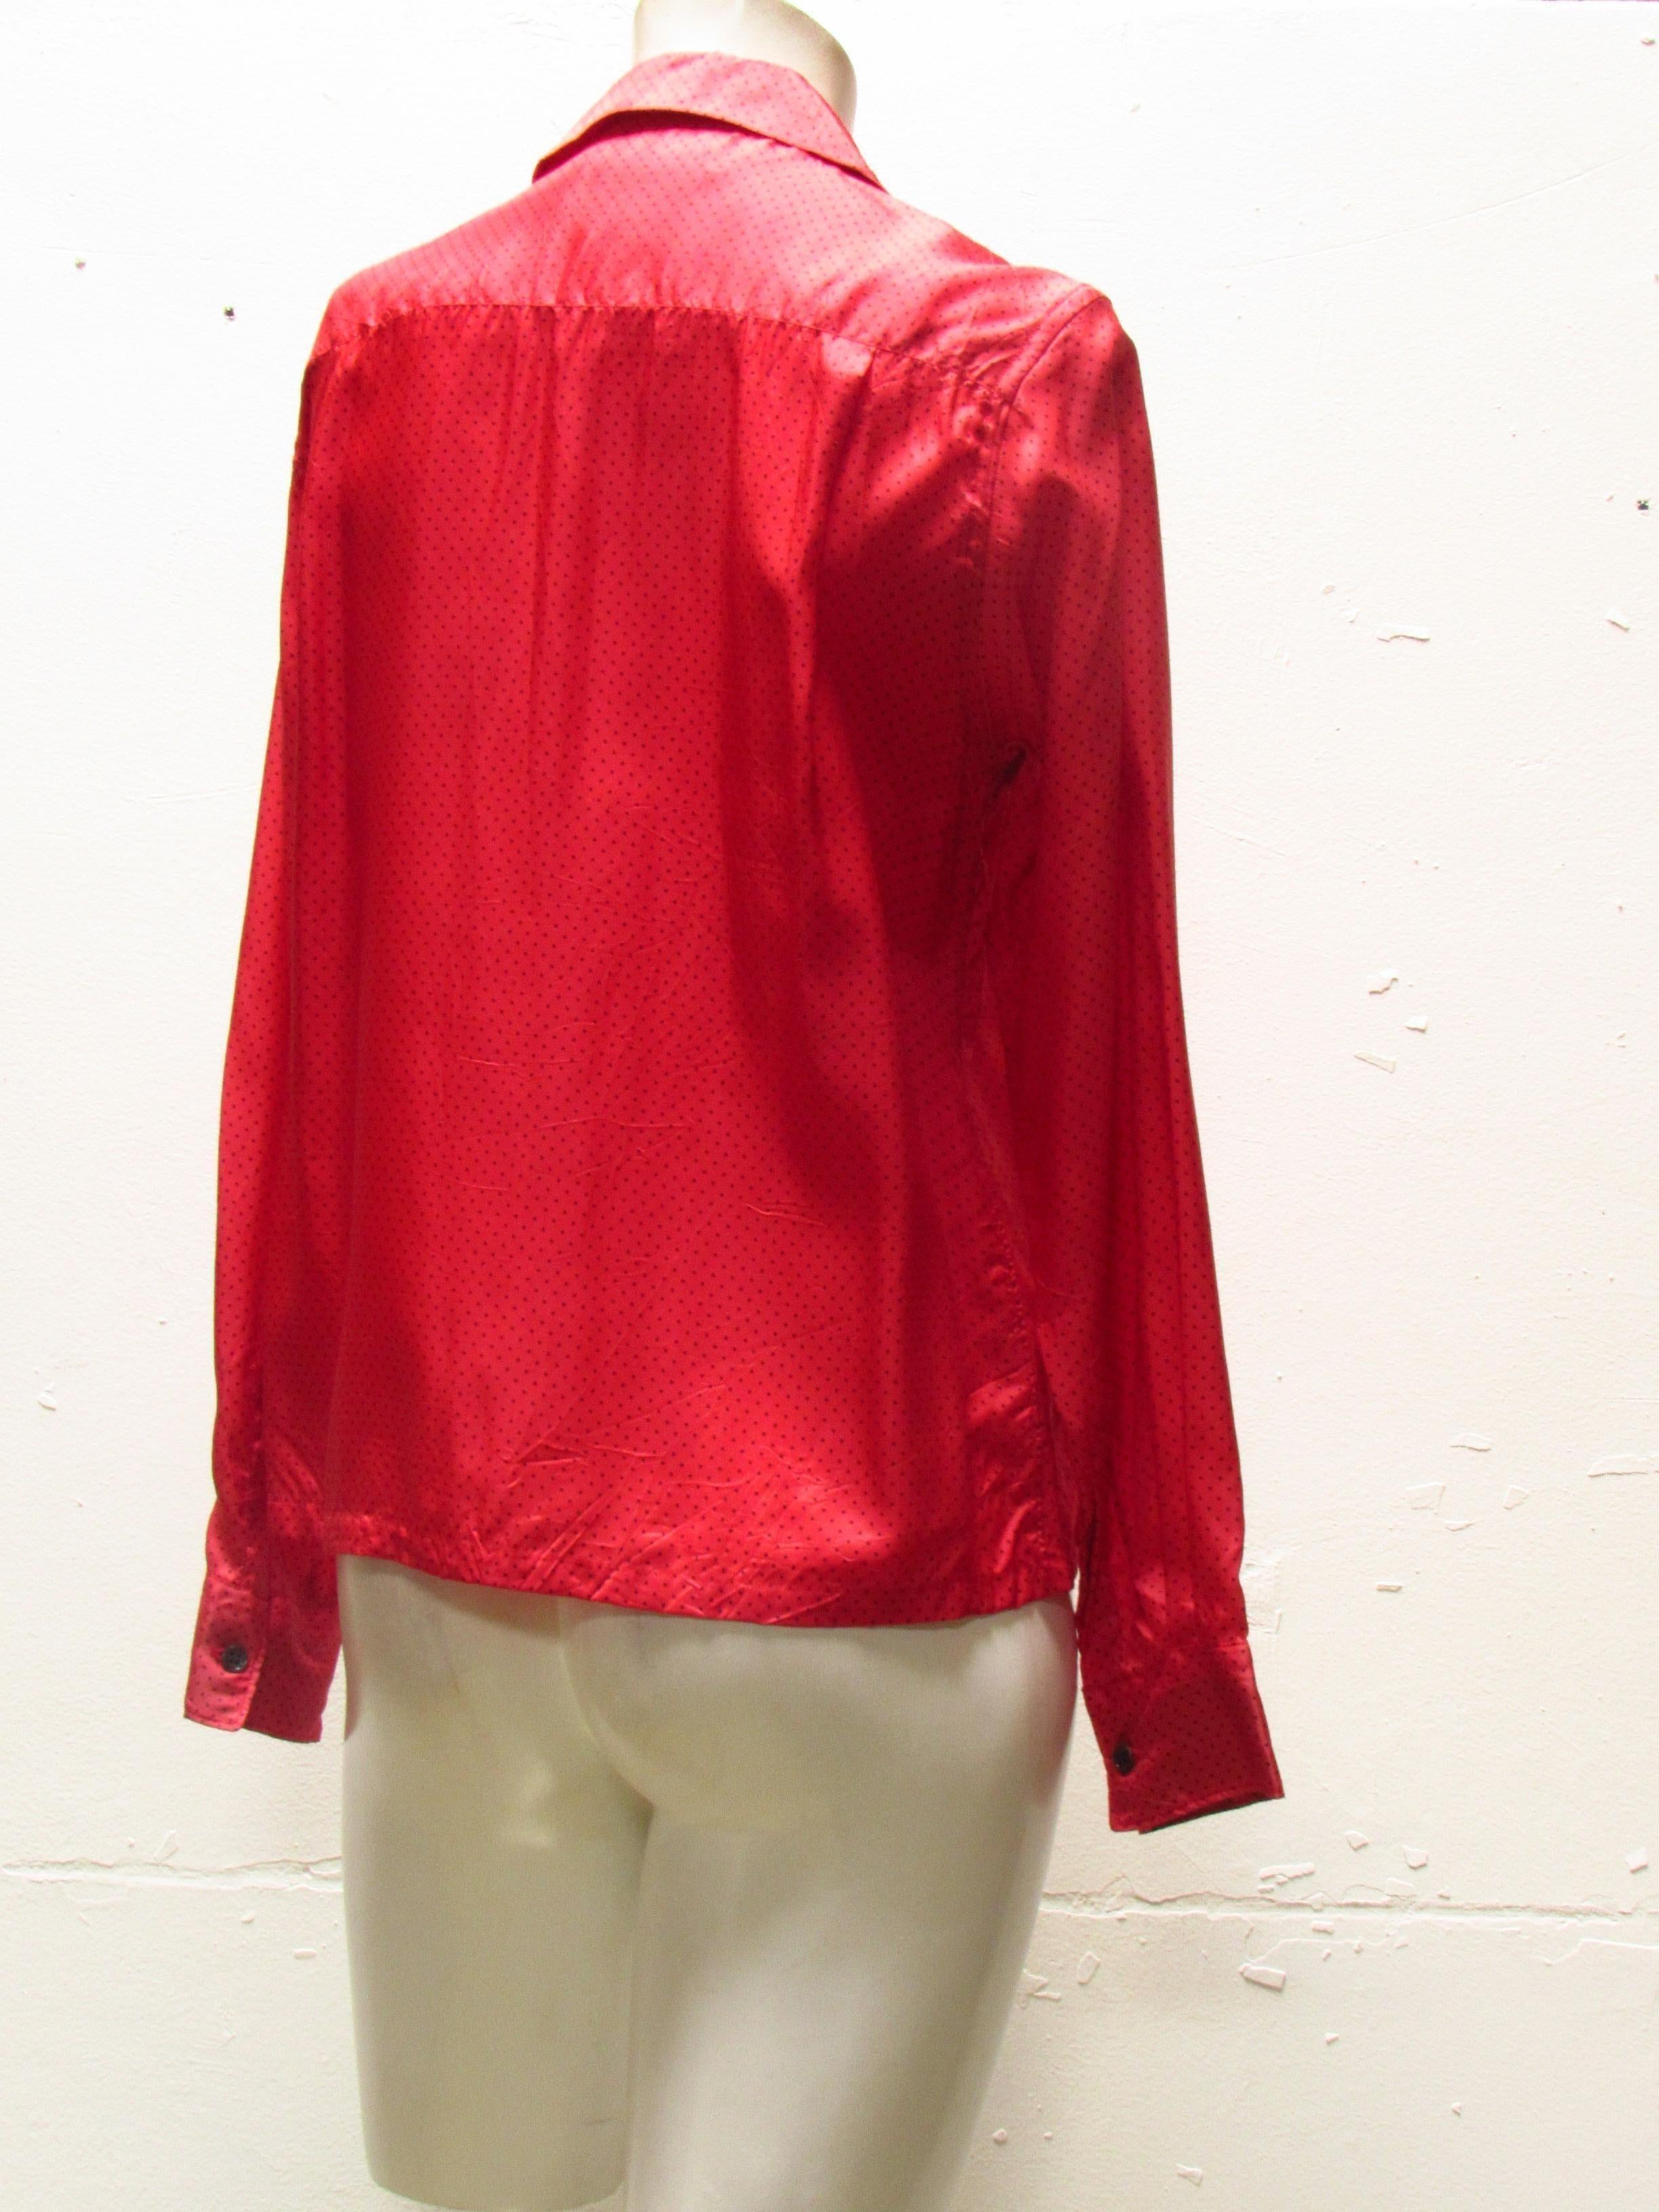 Comme des Garçons Button Down Blouse In New Condition For Sale In Laguna Beach, CA